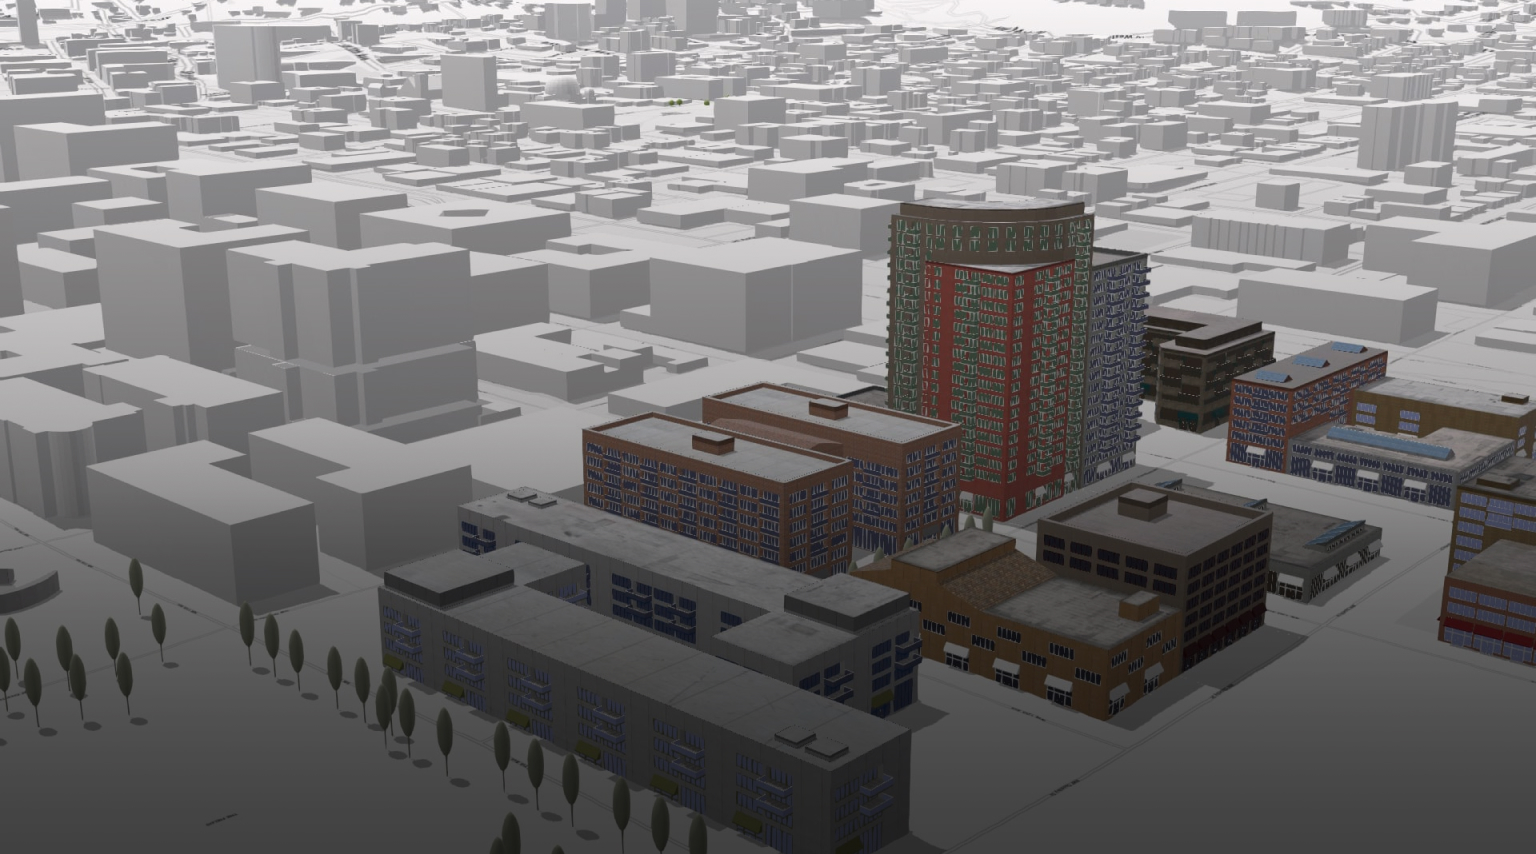 3D scene of a city urban area with gray building models